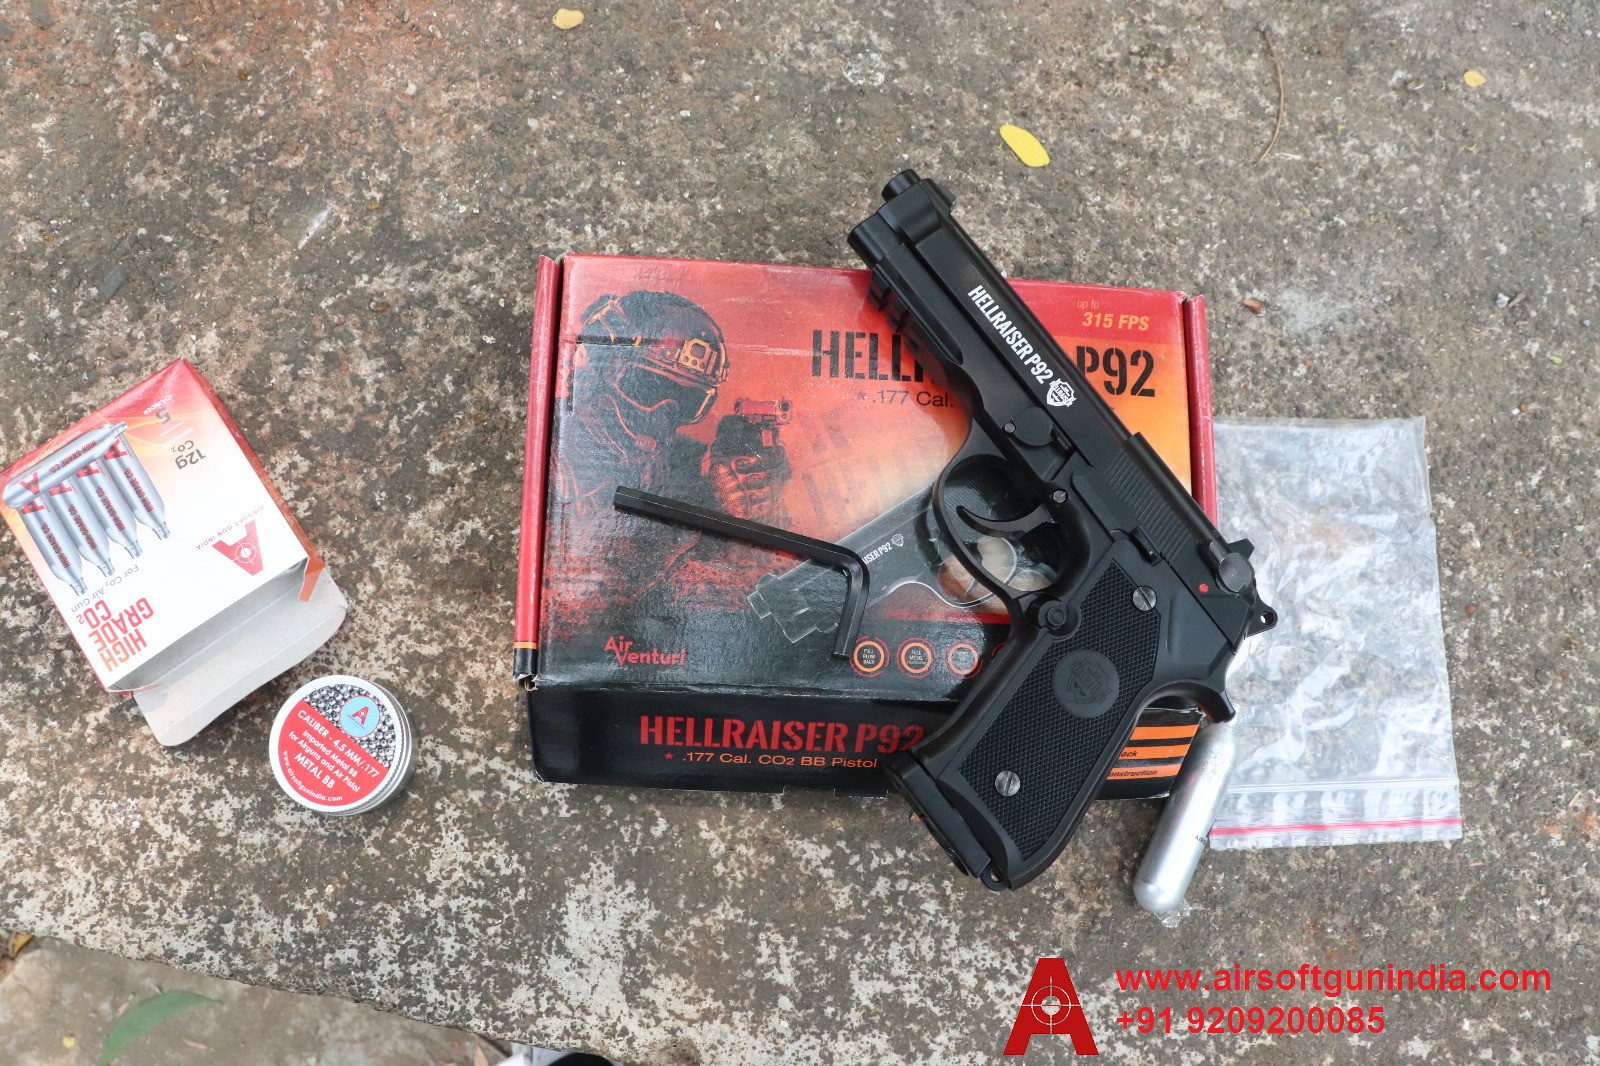 Colt Defender Co2 BB Air Pistol In India By Airsoft Gun India at